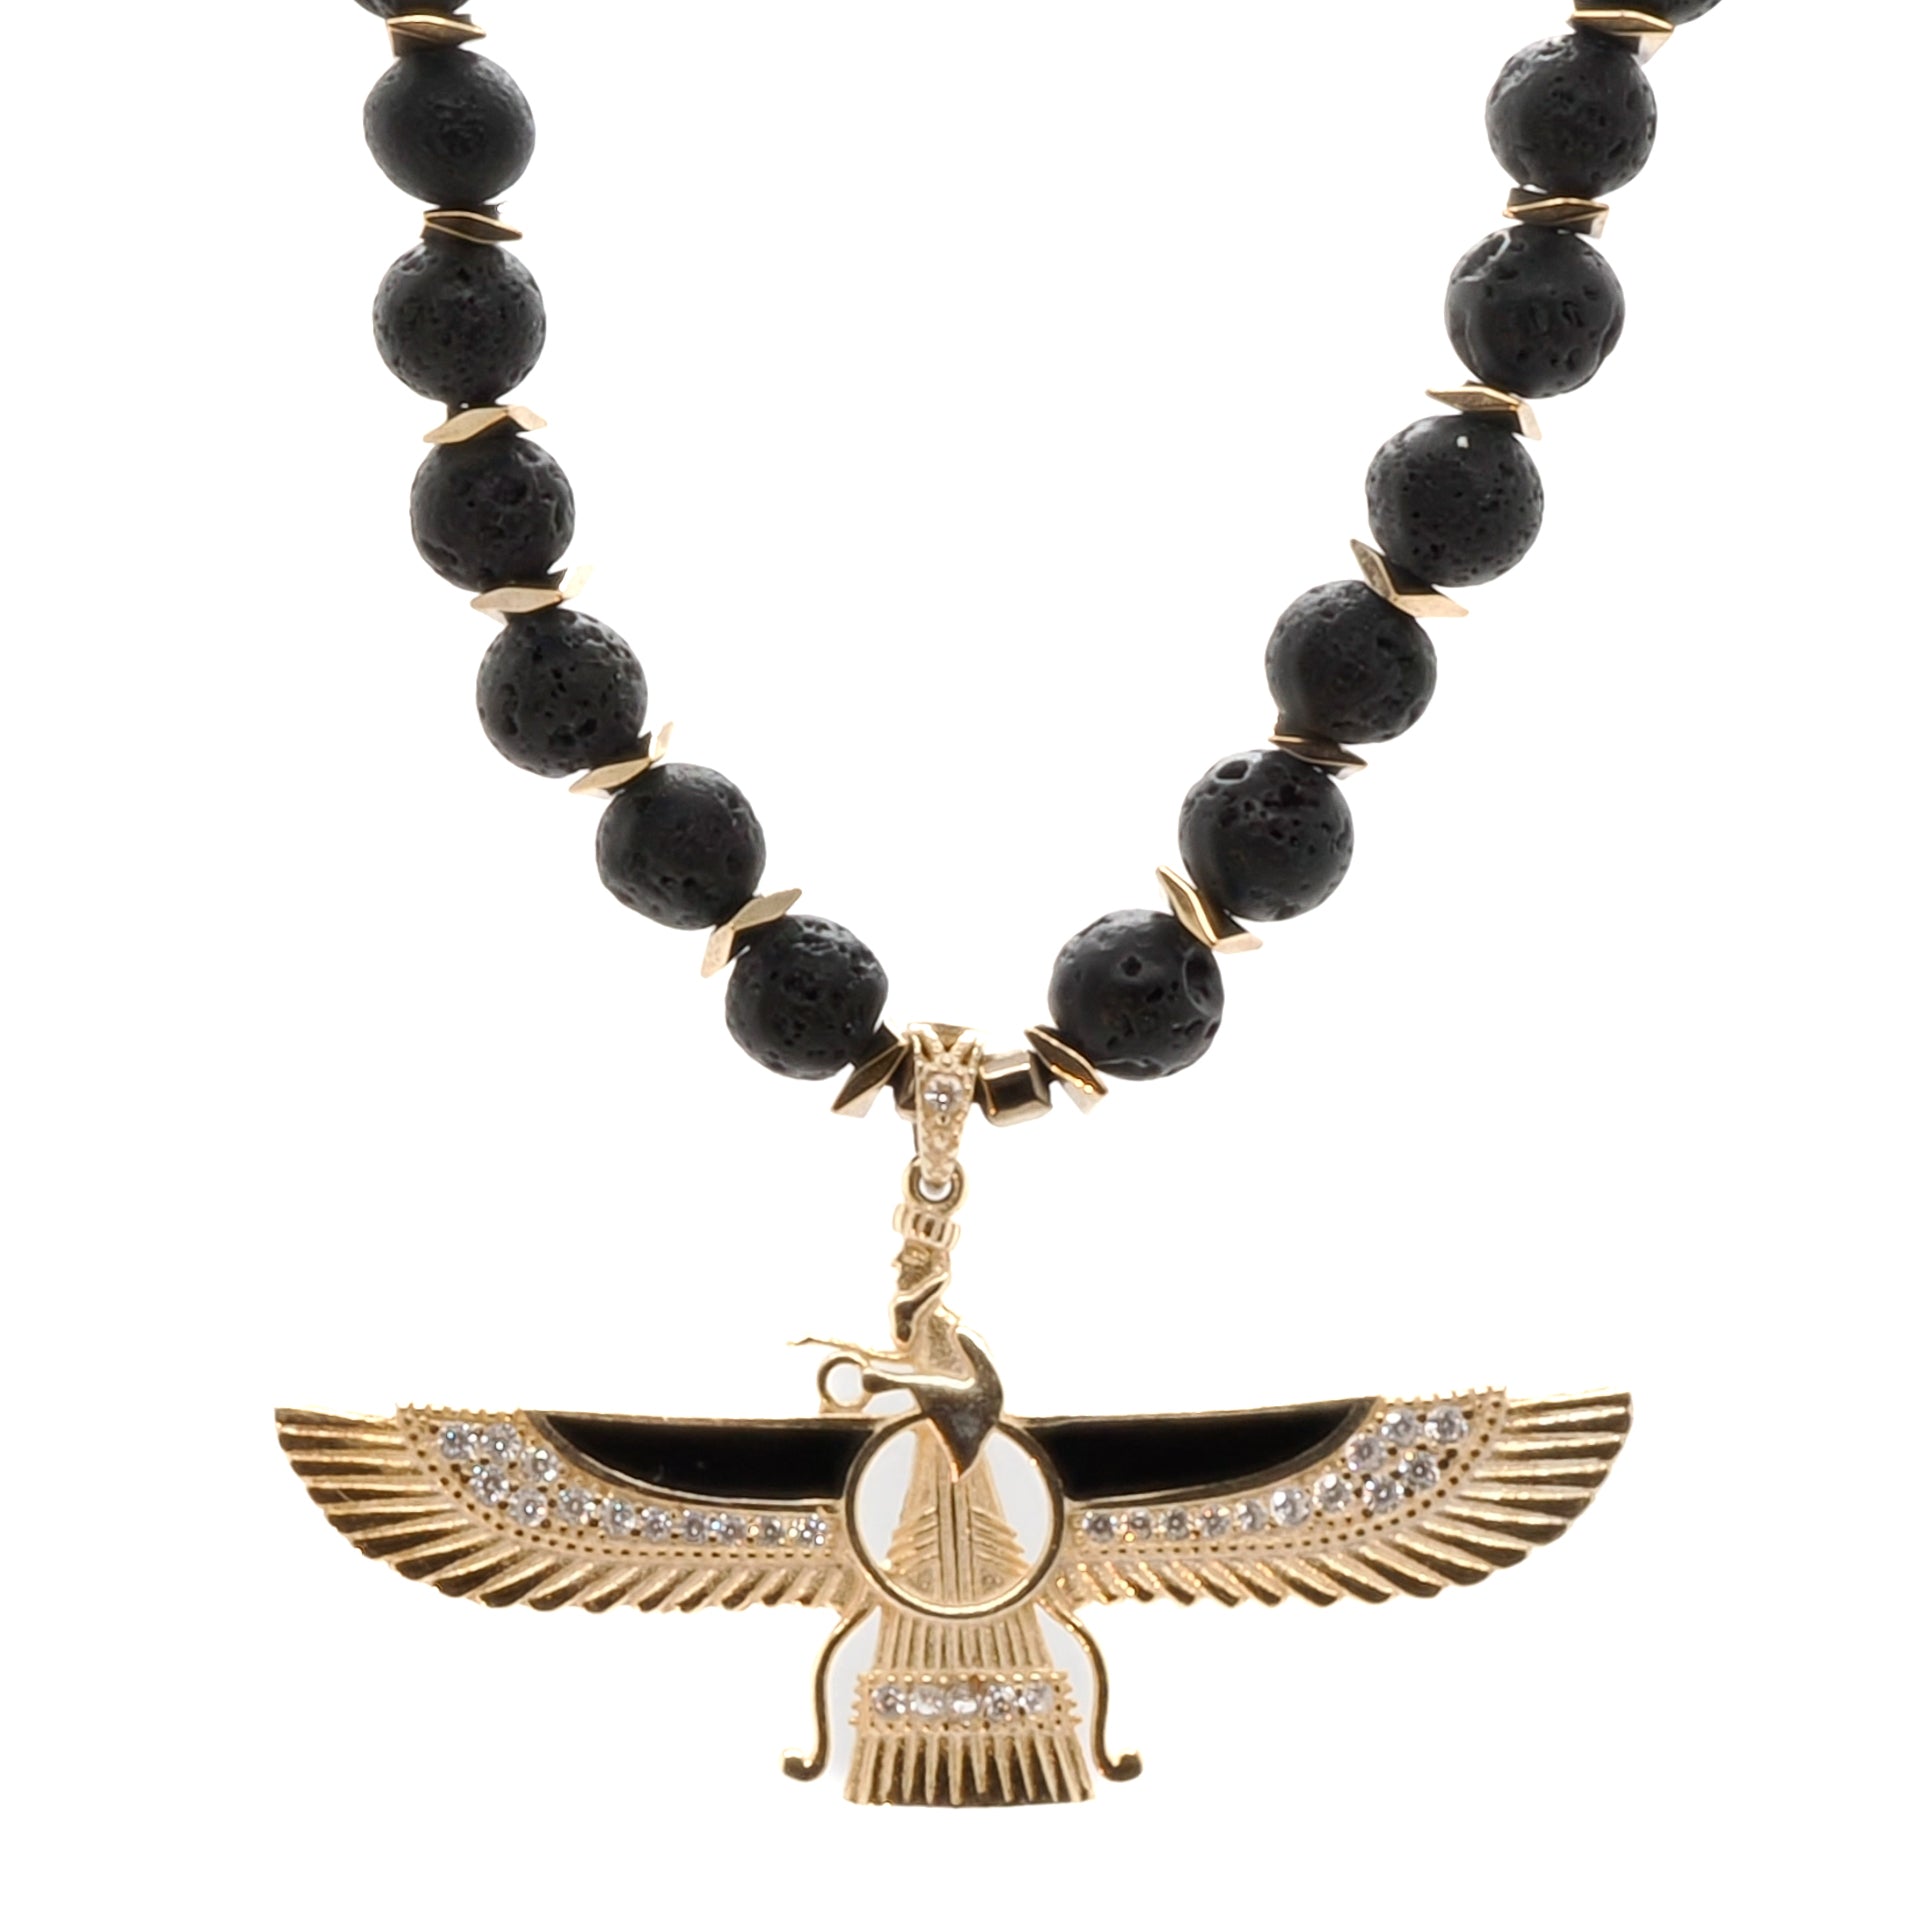 Powerful Faravahar Necklace - Embrace the ancient symbol of divine power and positive energy.